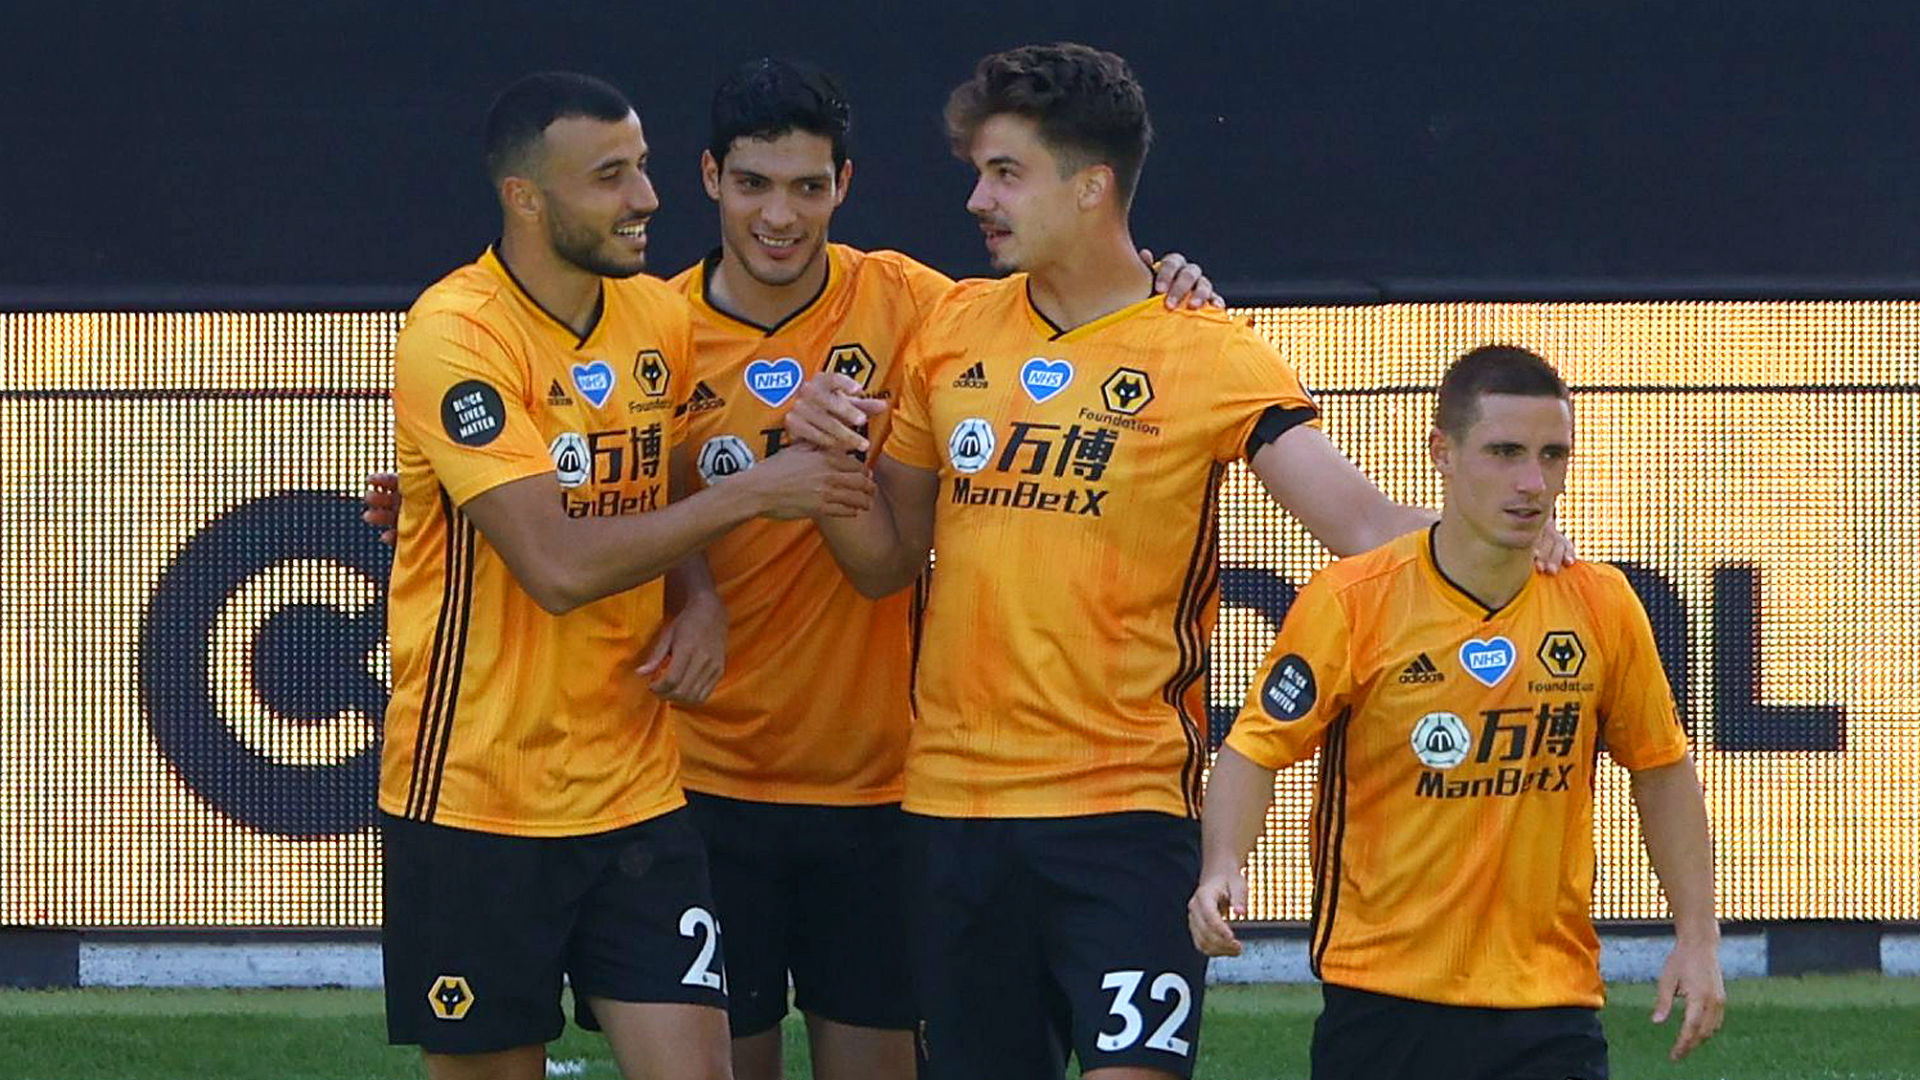 Victory over Everton kept Wolves in the Champions League hunt while Aston Villa claimed an important win at the other end of the table.